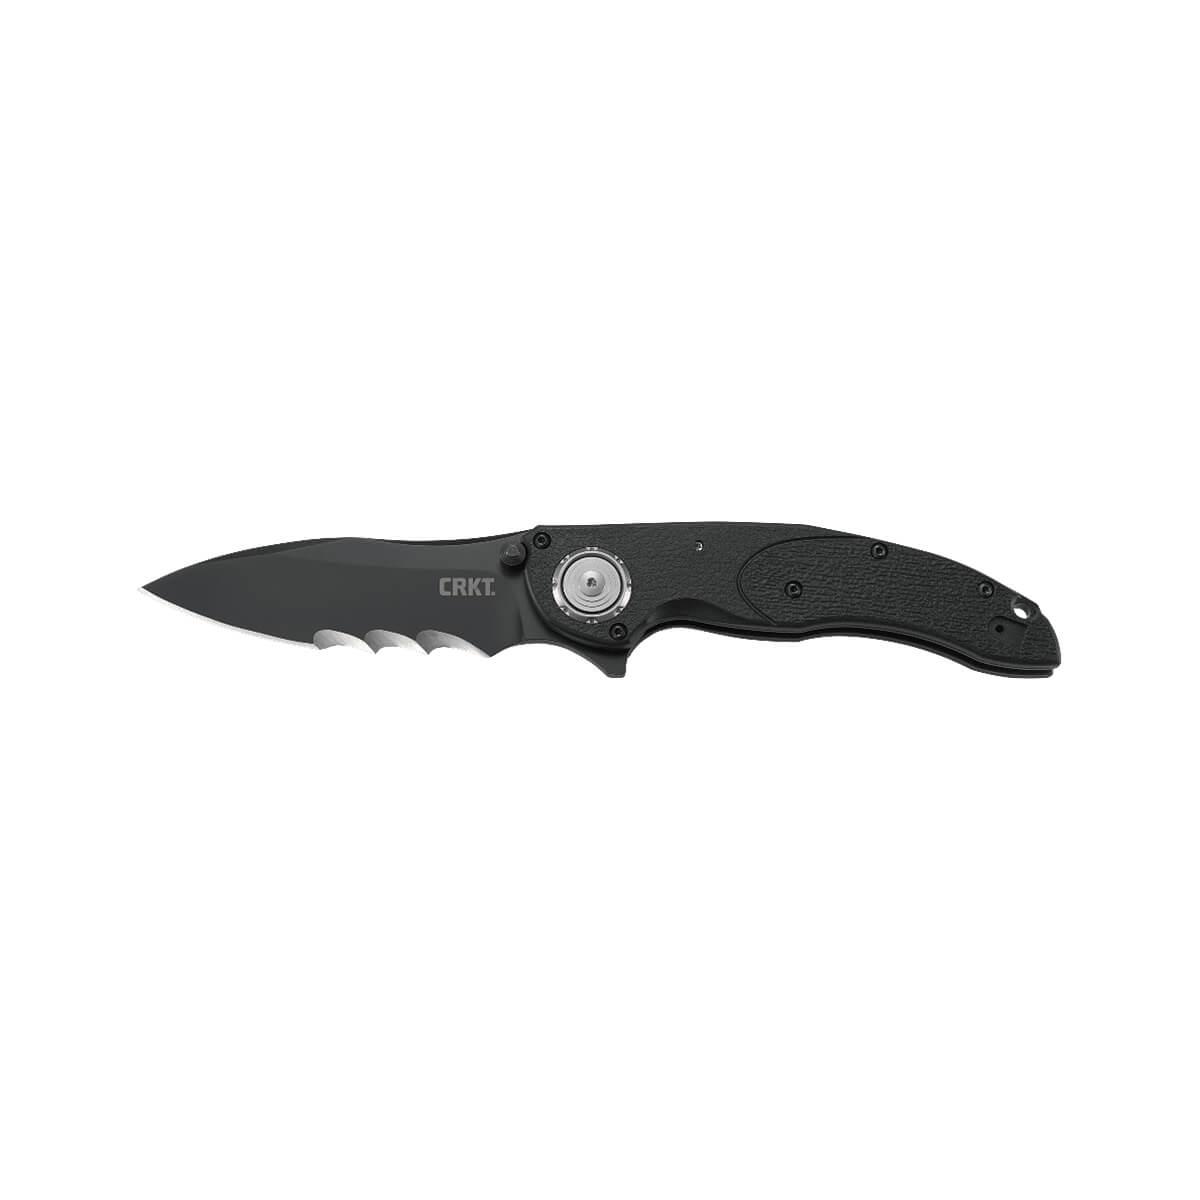  Linchpin Black With Veff Serrations Knife